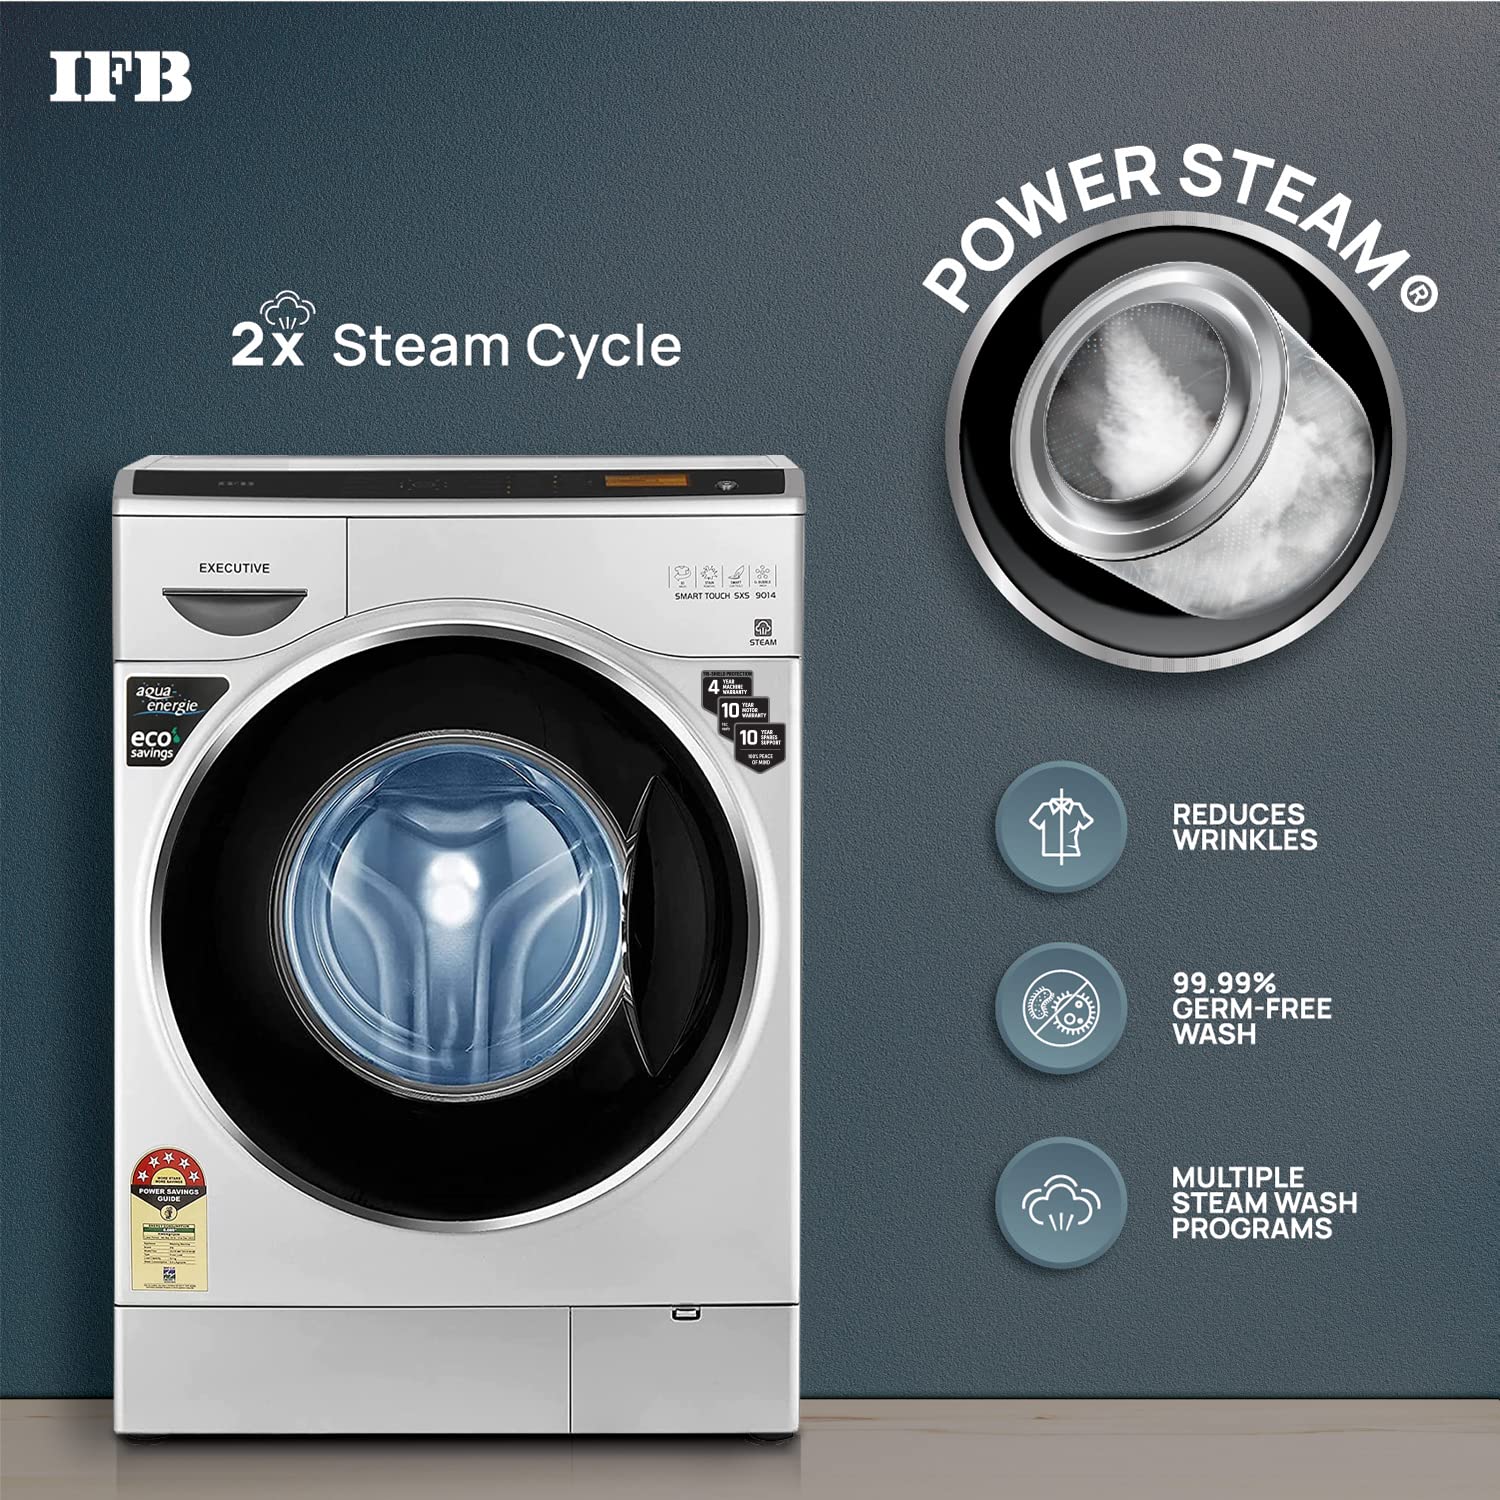 IFB 9 Kg 5 Star Front Load Washing Machine 2X Power Steam (EXECUTIVE SMART TOUCH SXS, Silver, O2 Bubble Wash, 4 years Comprehensive Warranty)